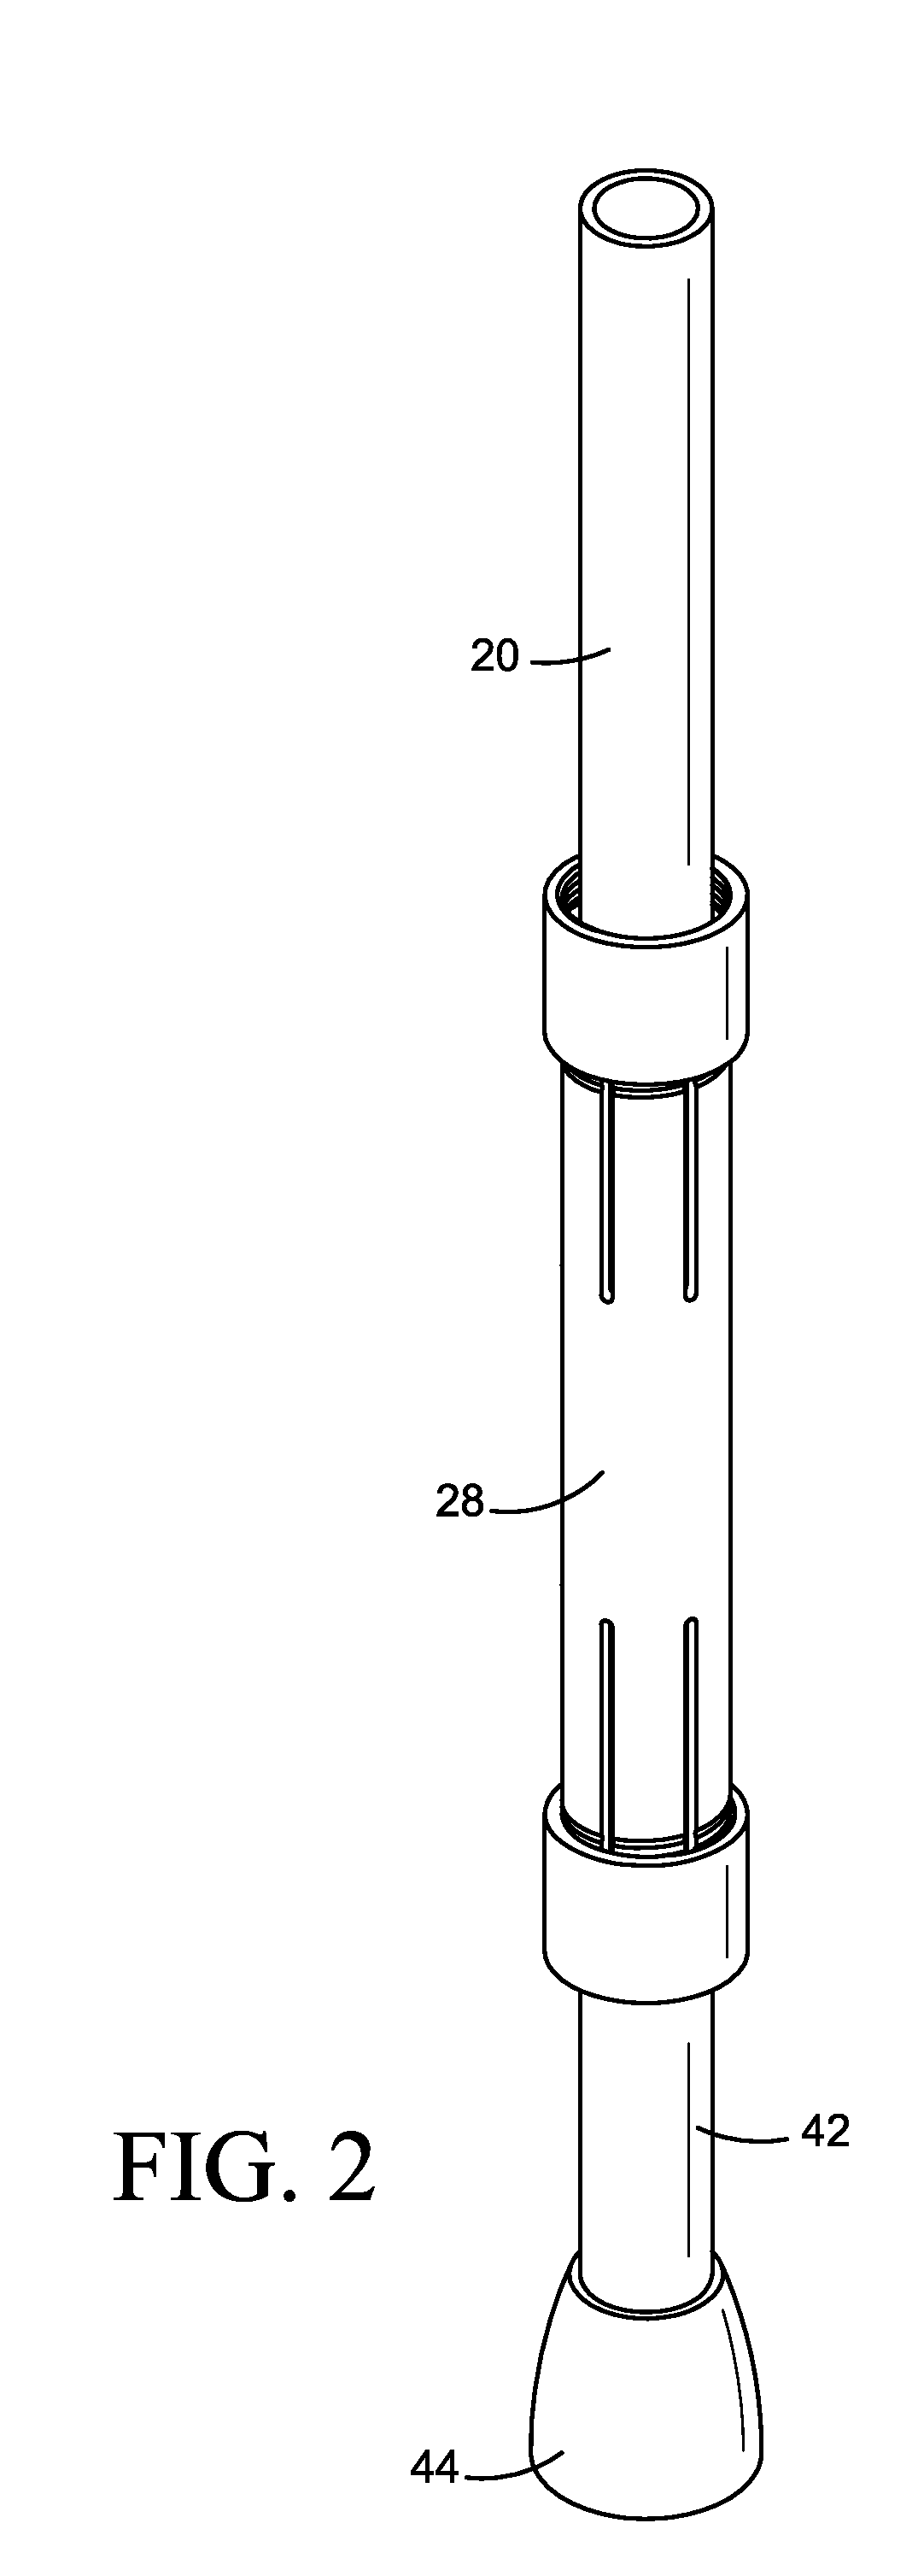 Method of tactical training using a portable structure and a portable structure